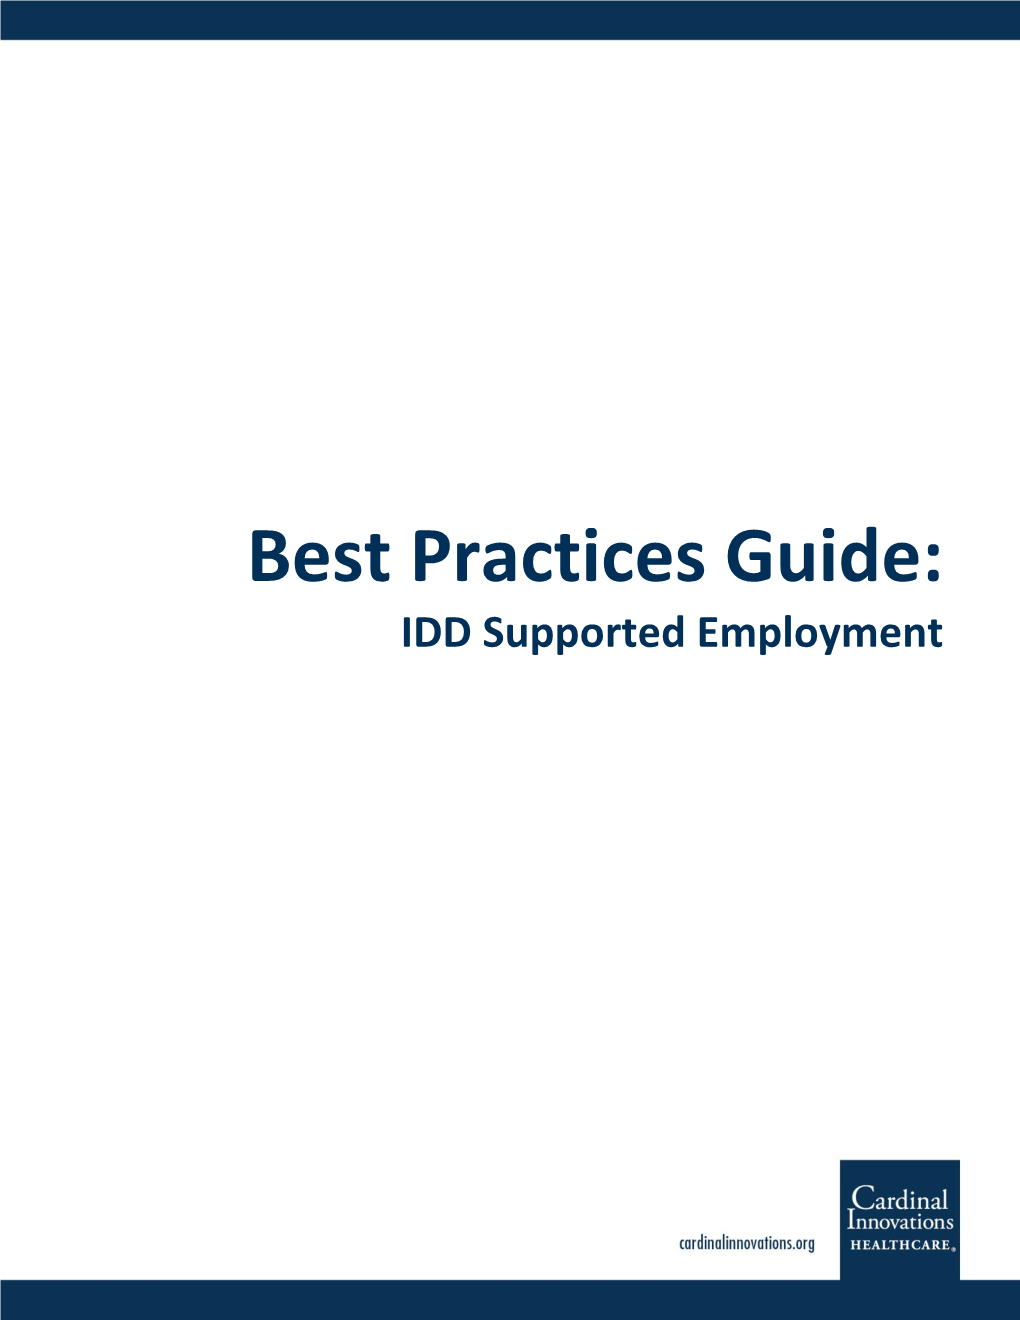 Best Practices Guide: IDD Supported Employment